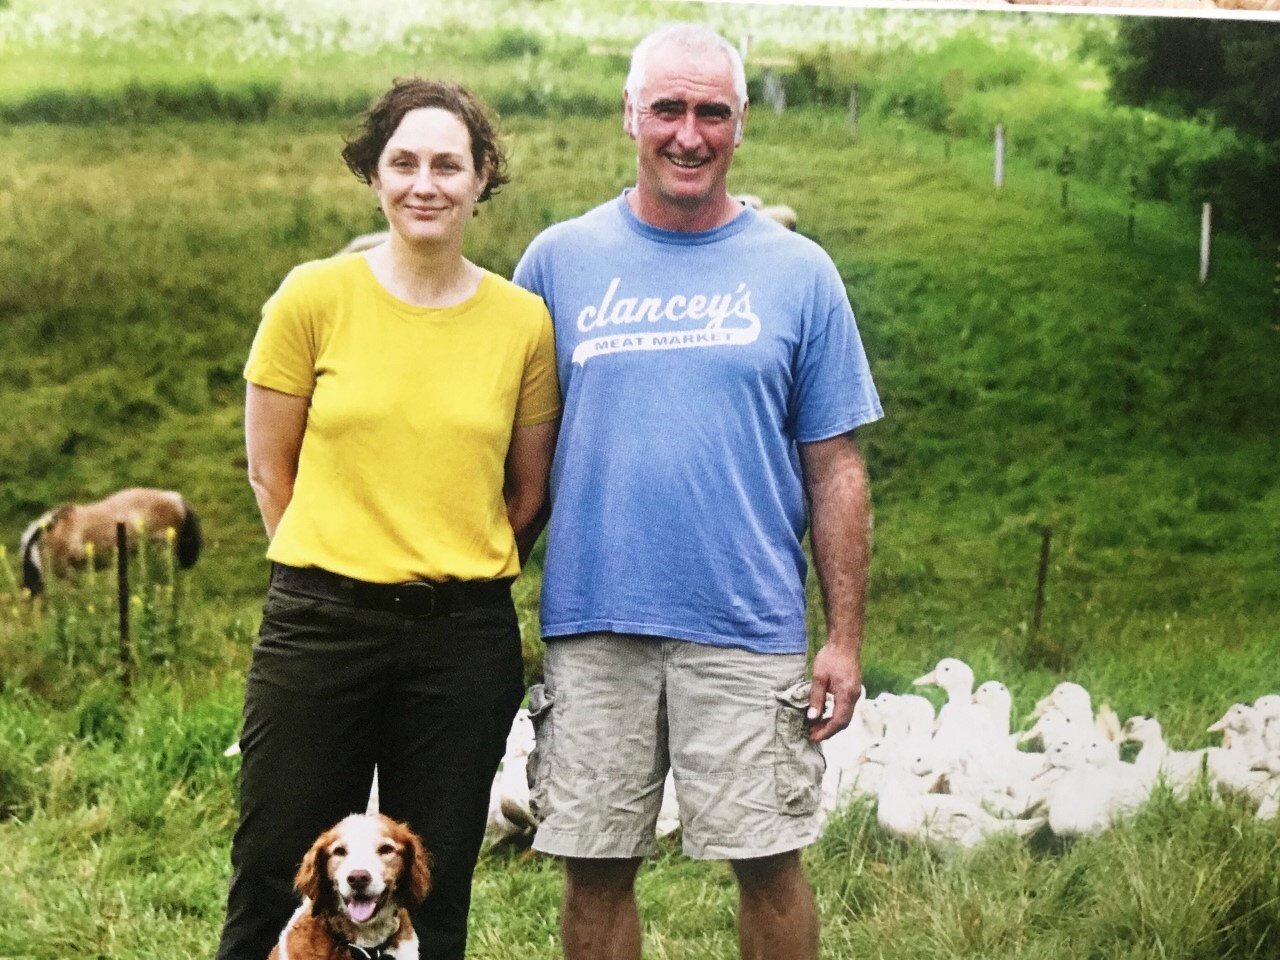 Au Bon Canards owners standing in a field with their dog with ducks in the background